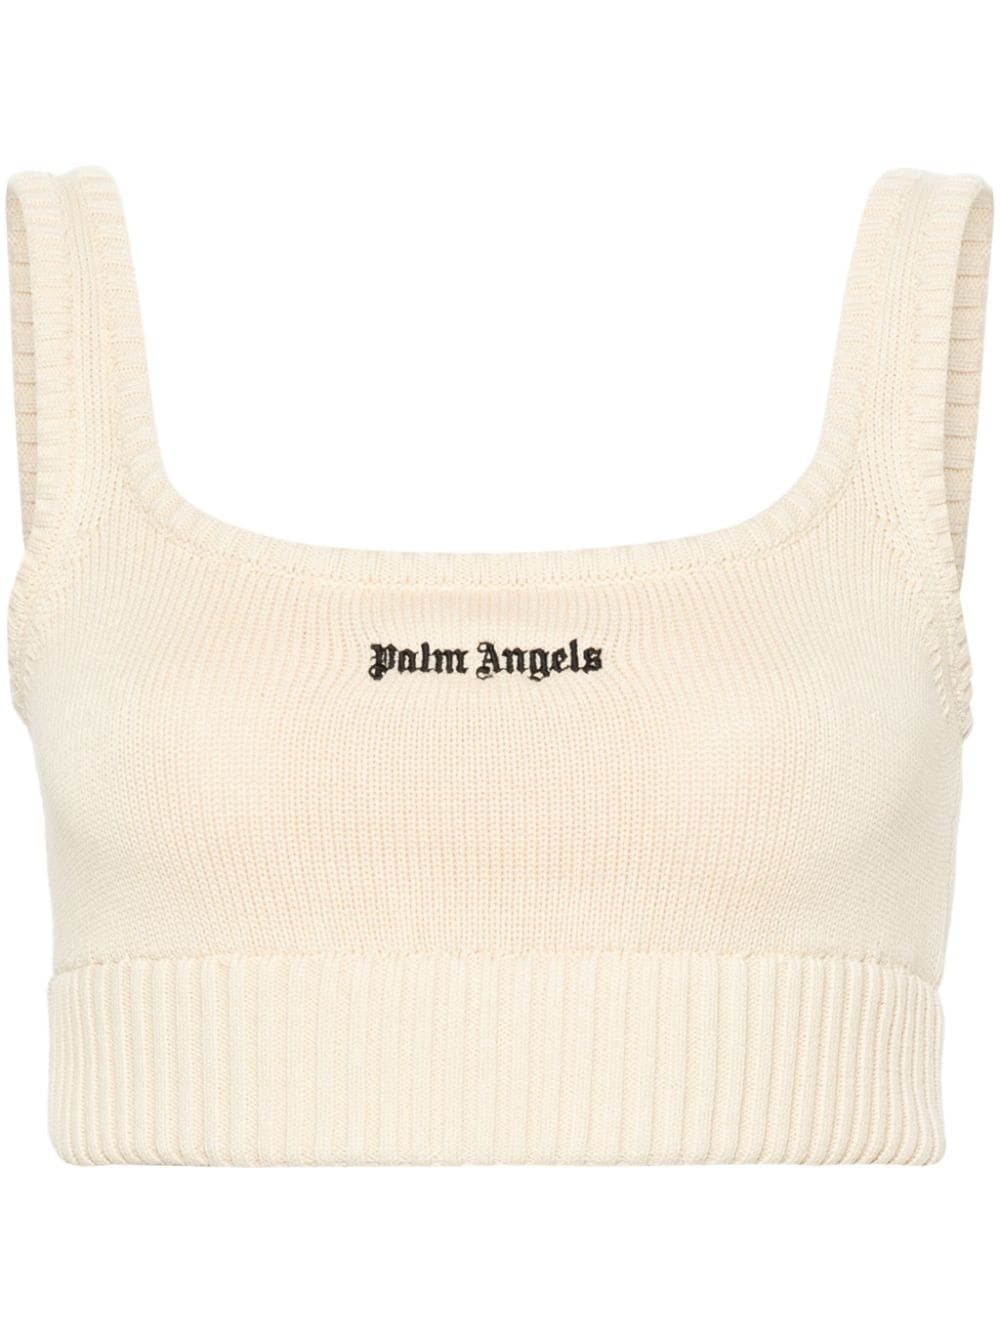 Embroidered-logo knit tank top<BR/><BR/><BR/>